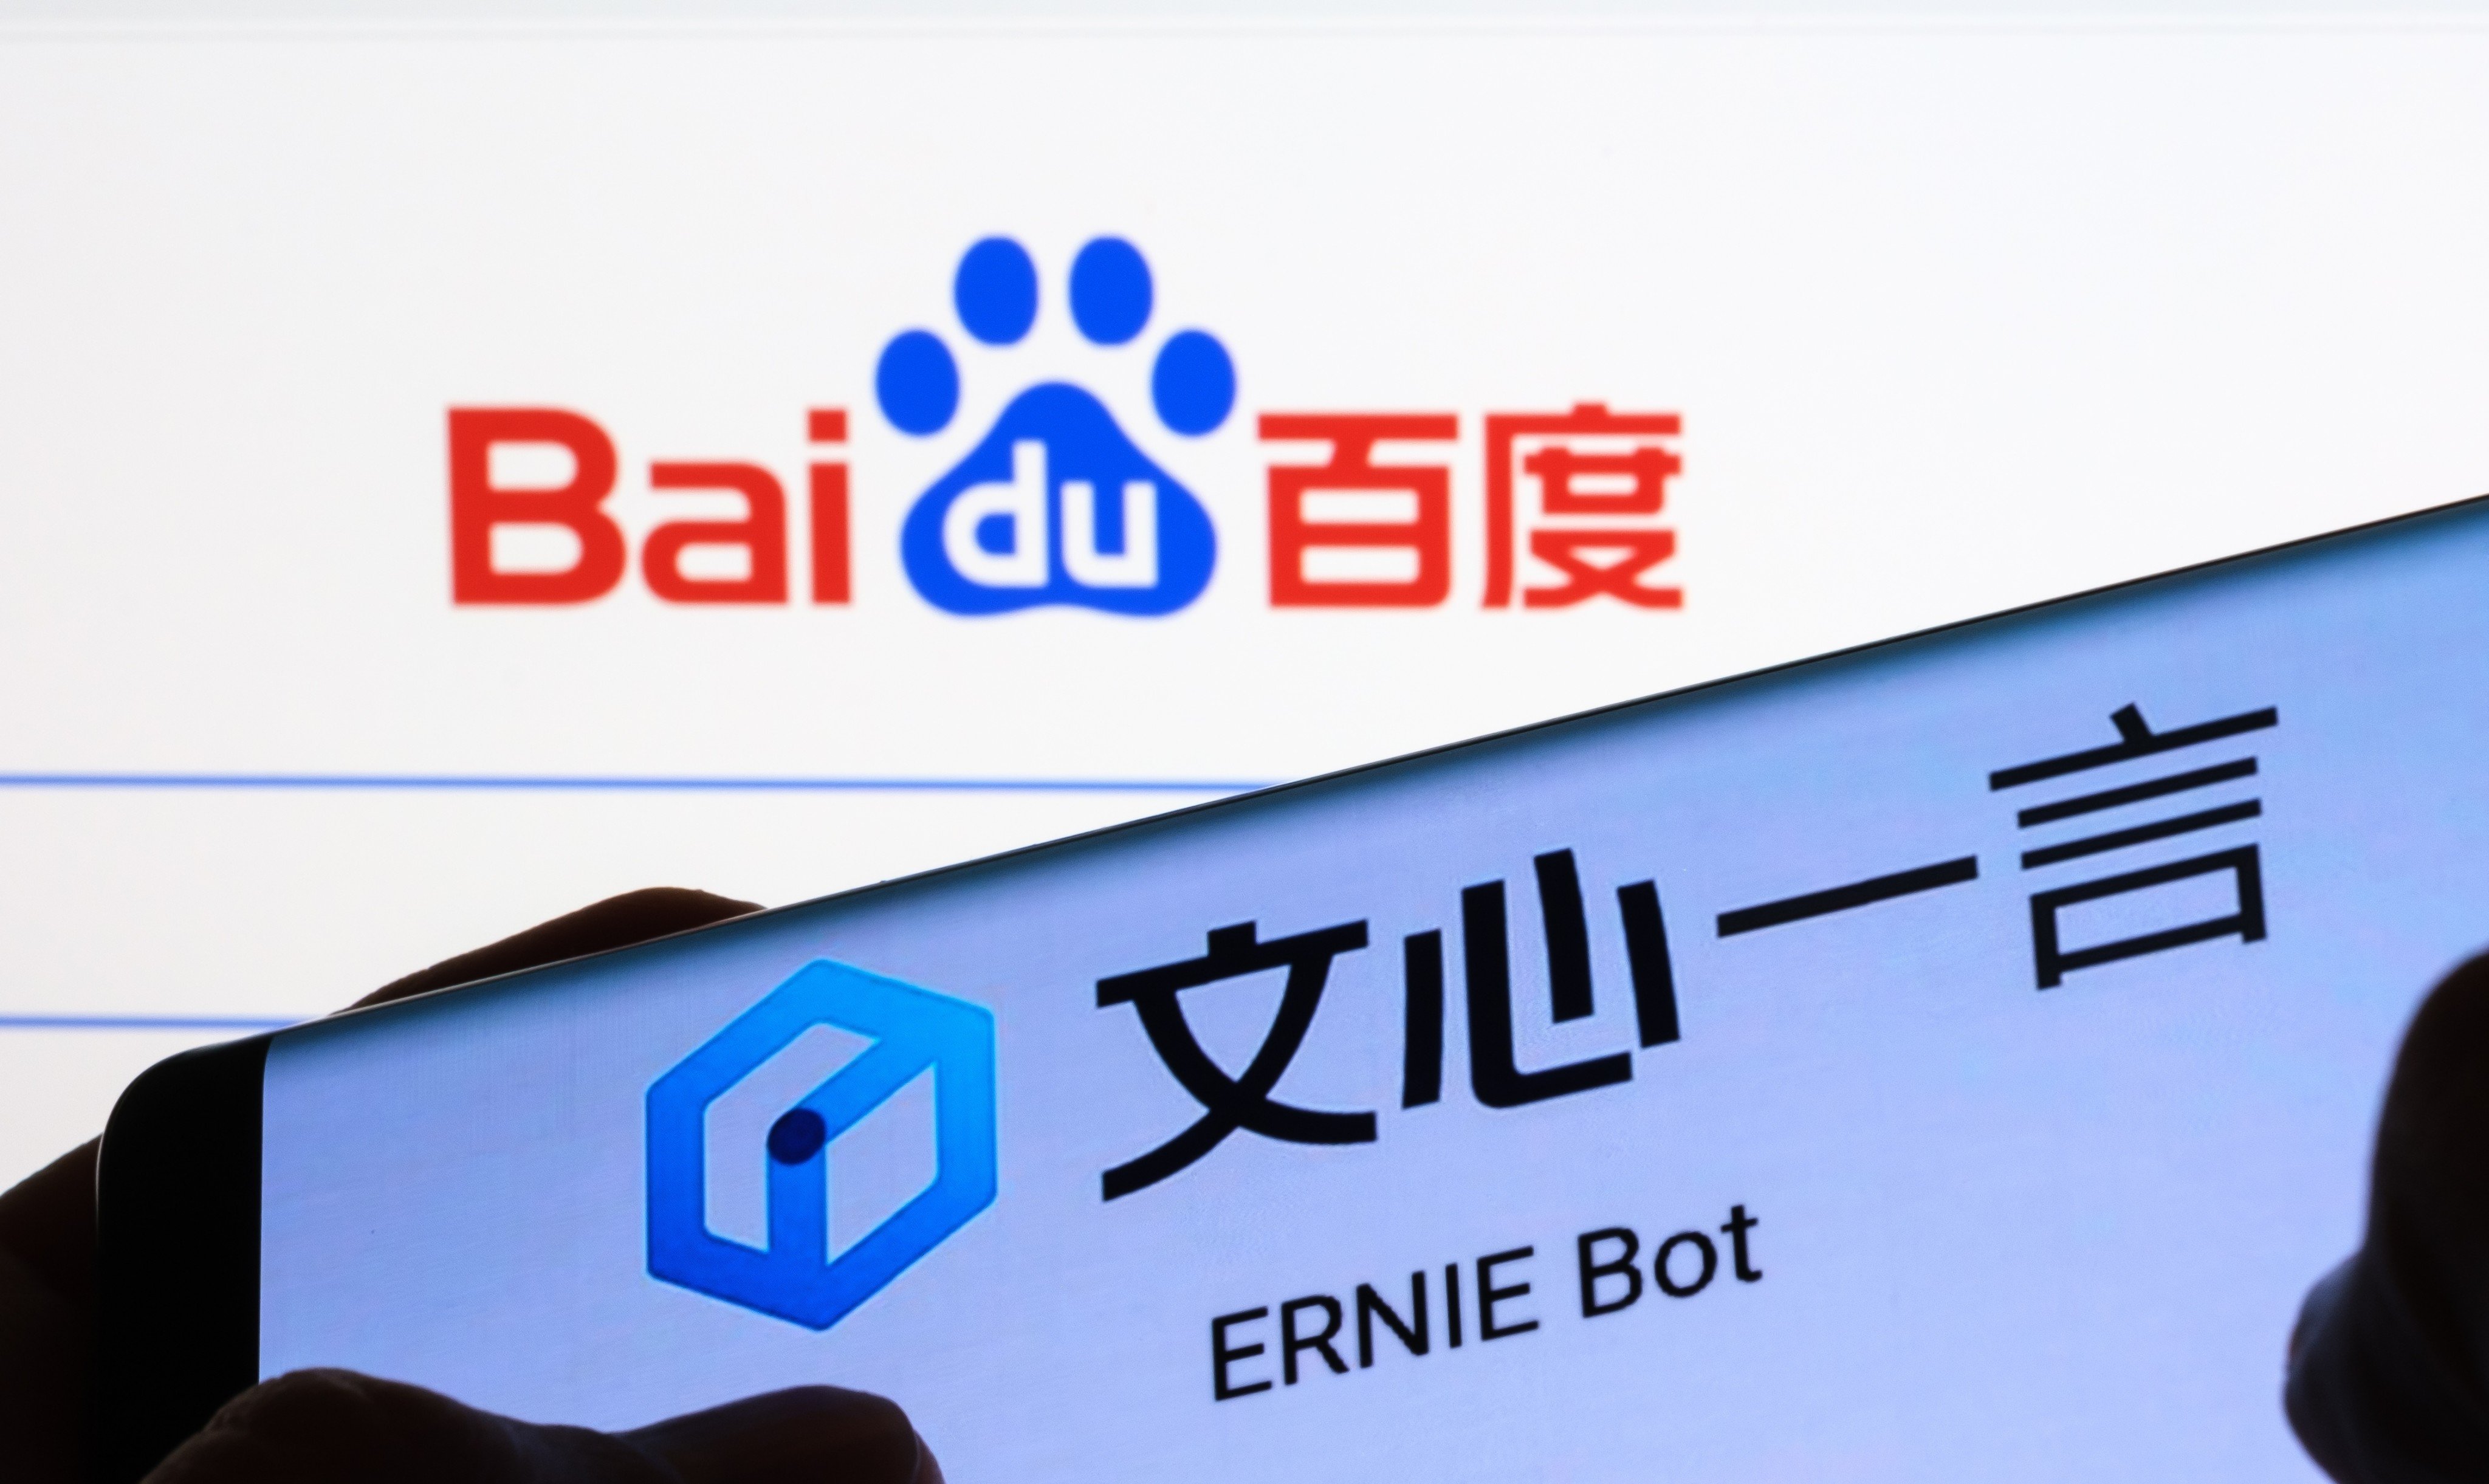 The Ernie Bot logo is seen on a smartphone screen with Baidu’s logo in the background. Photo: Shutterstock